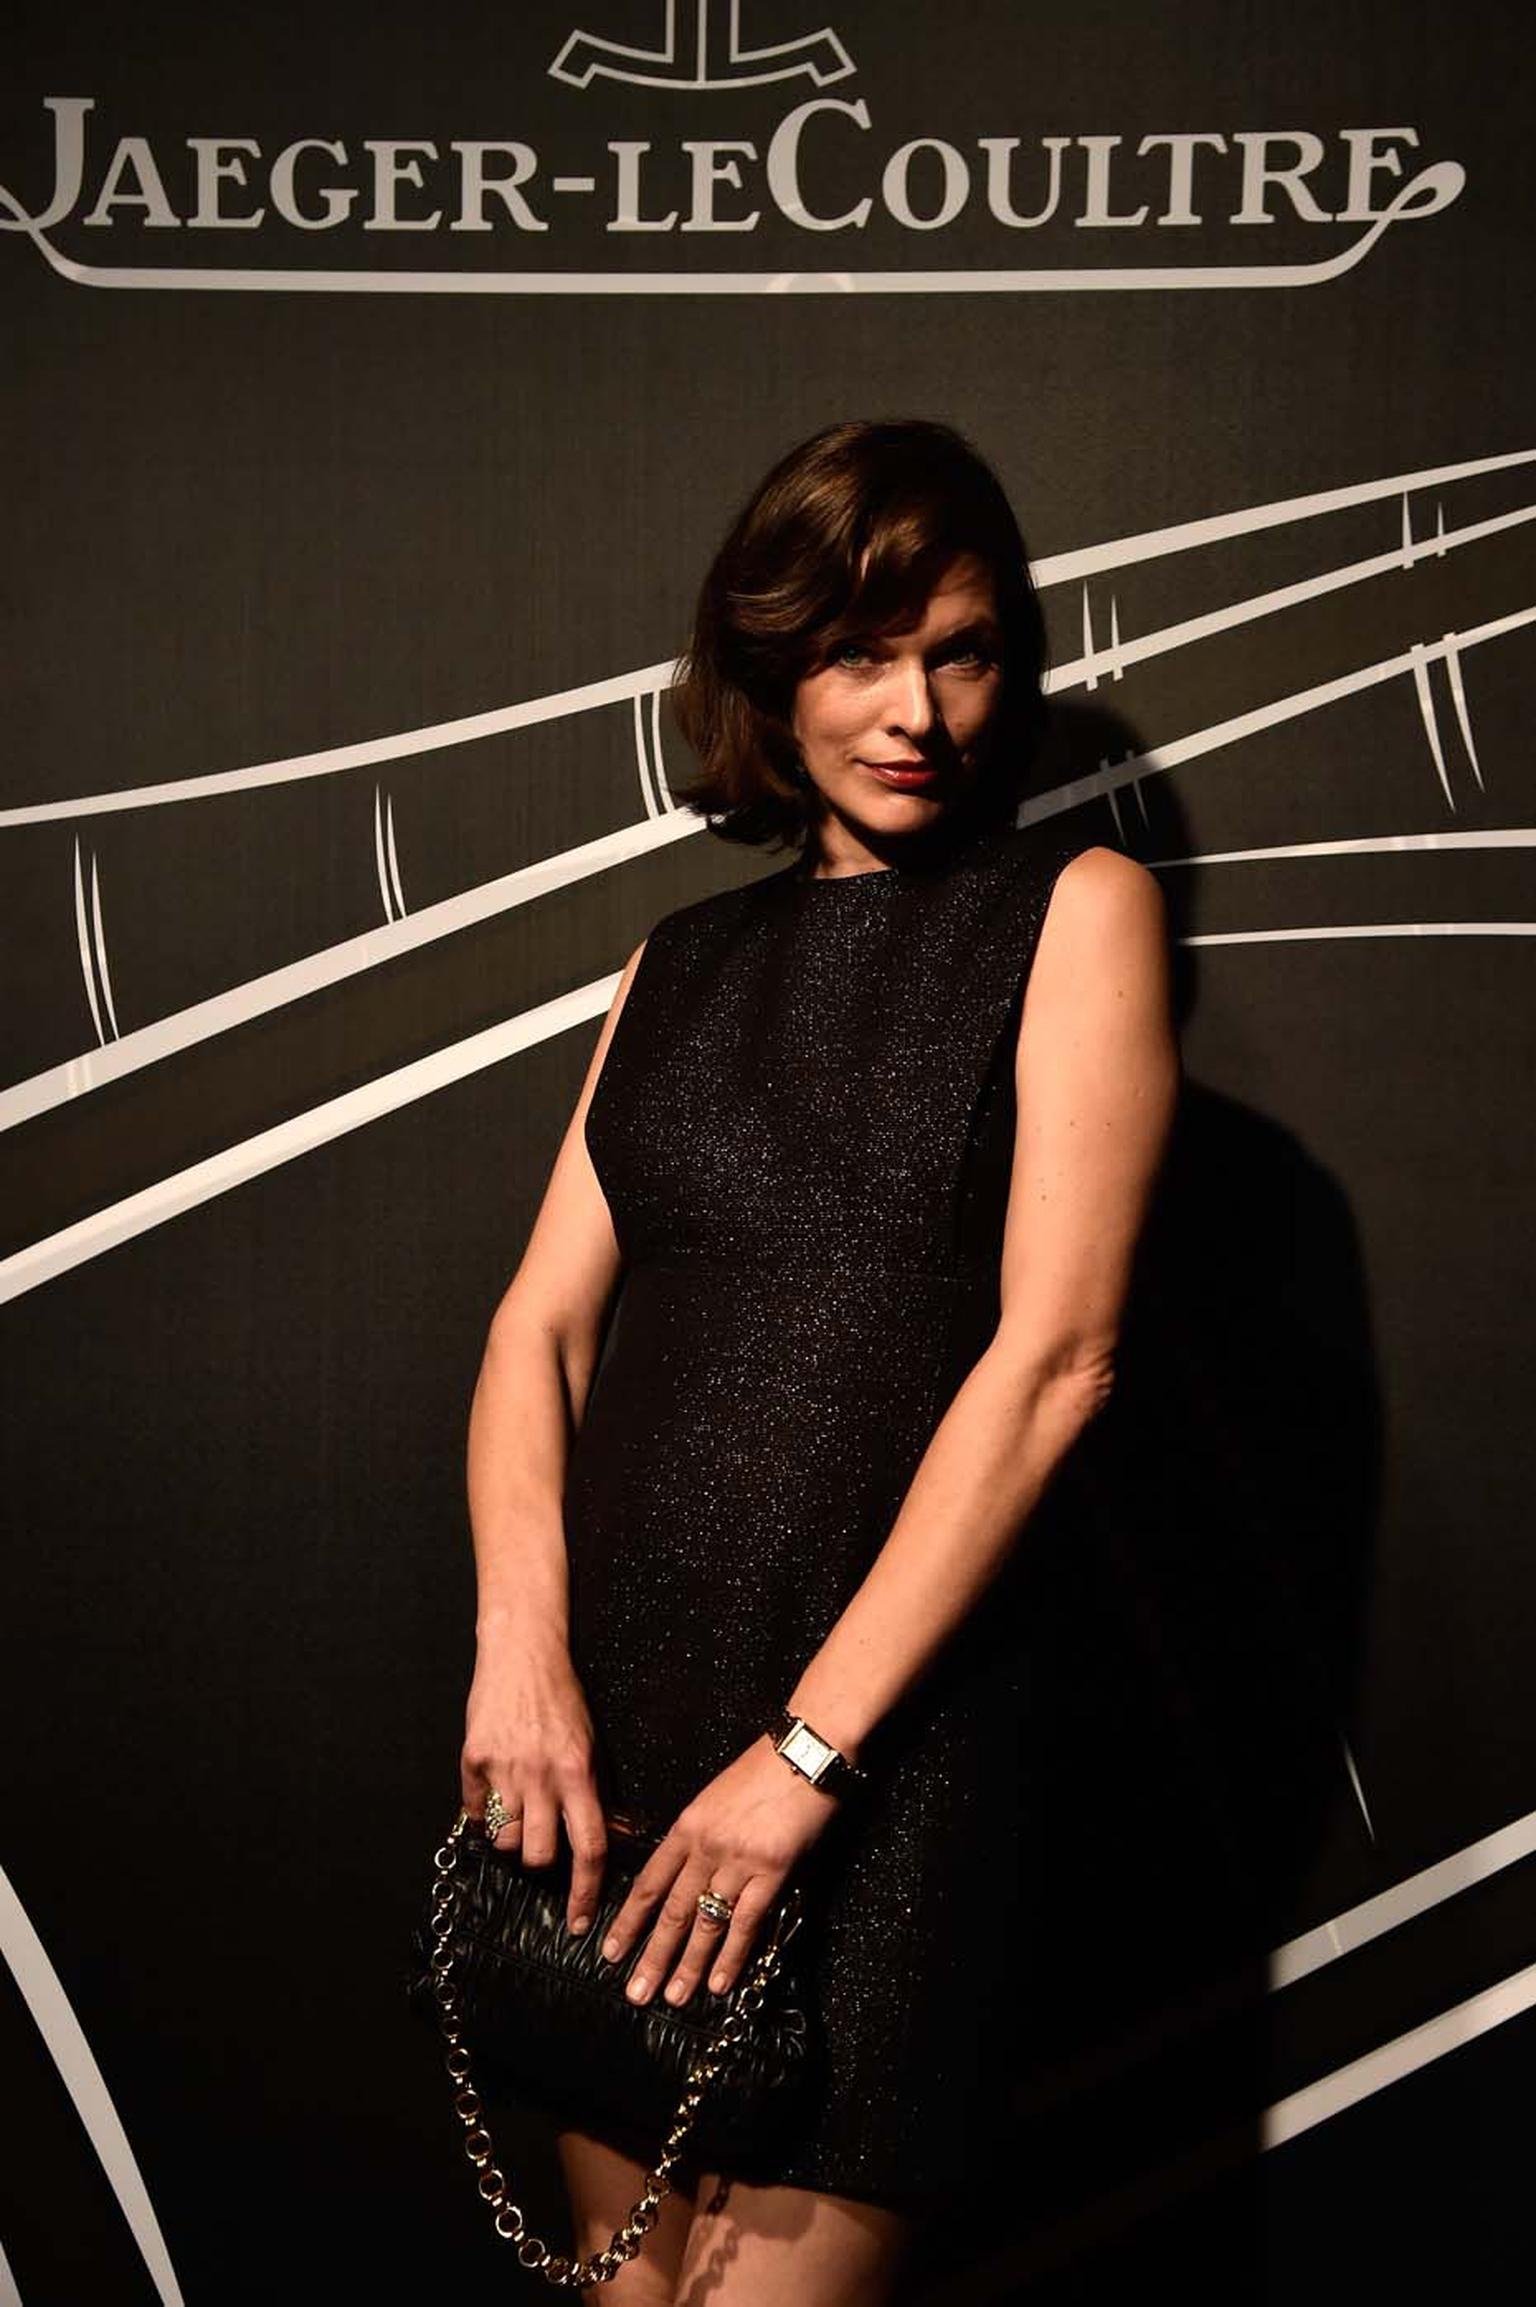 Milla Jovovich strikes a pose wearing a Jaeger-LeCoultre watch during the 2014 Venice Film Festival's Gala Dinner.